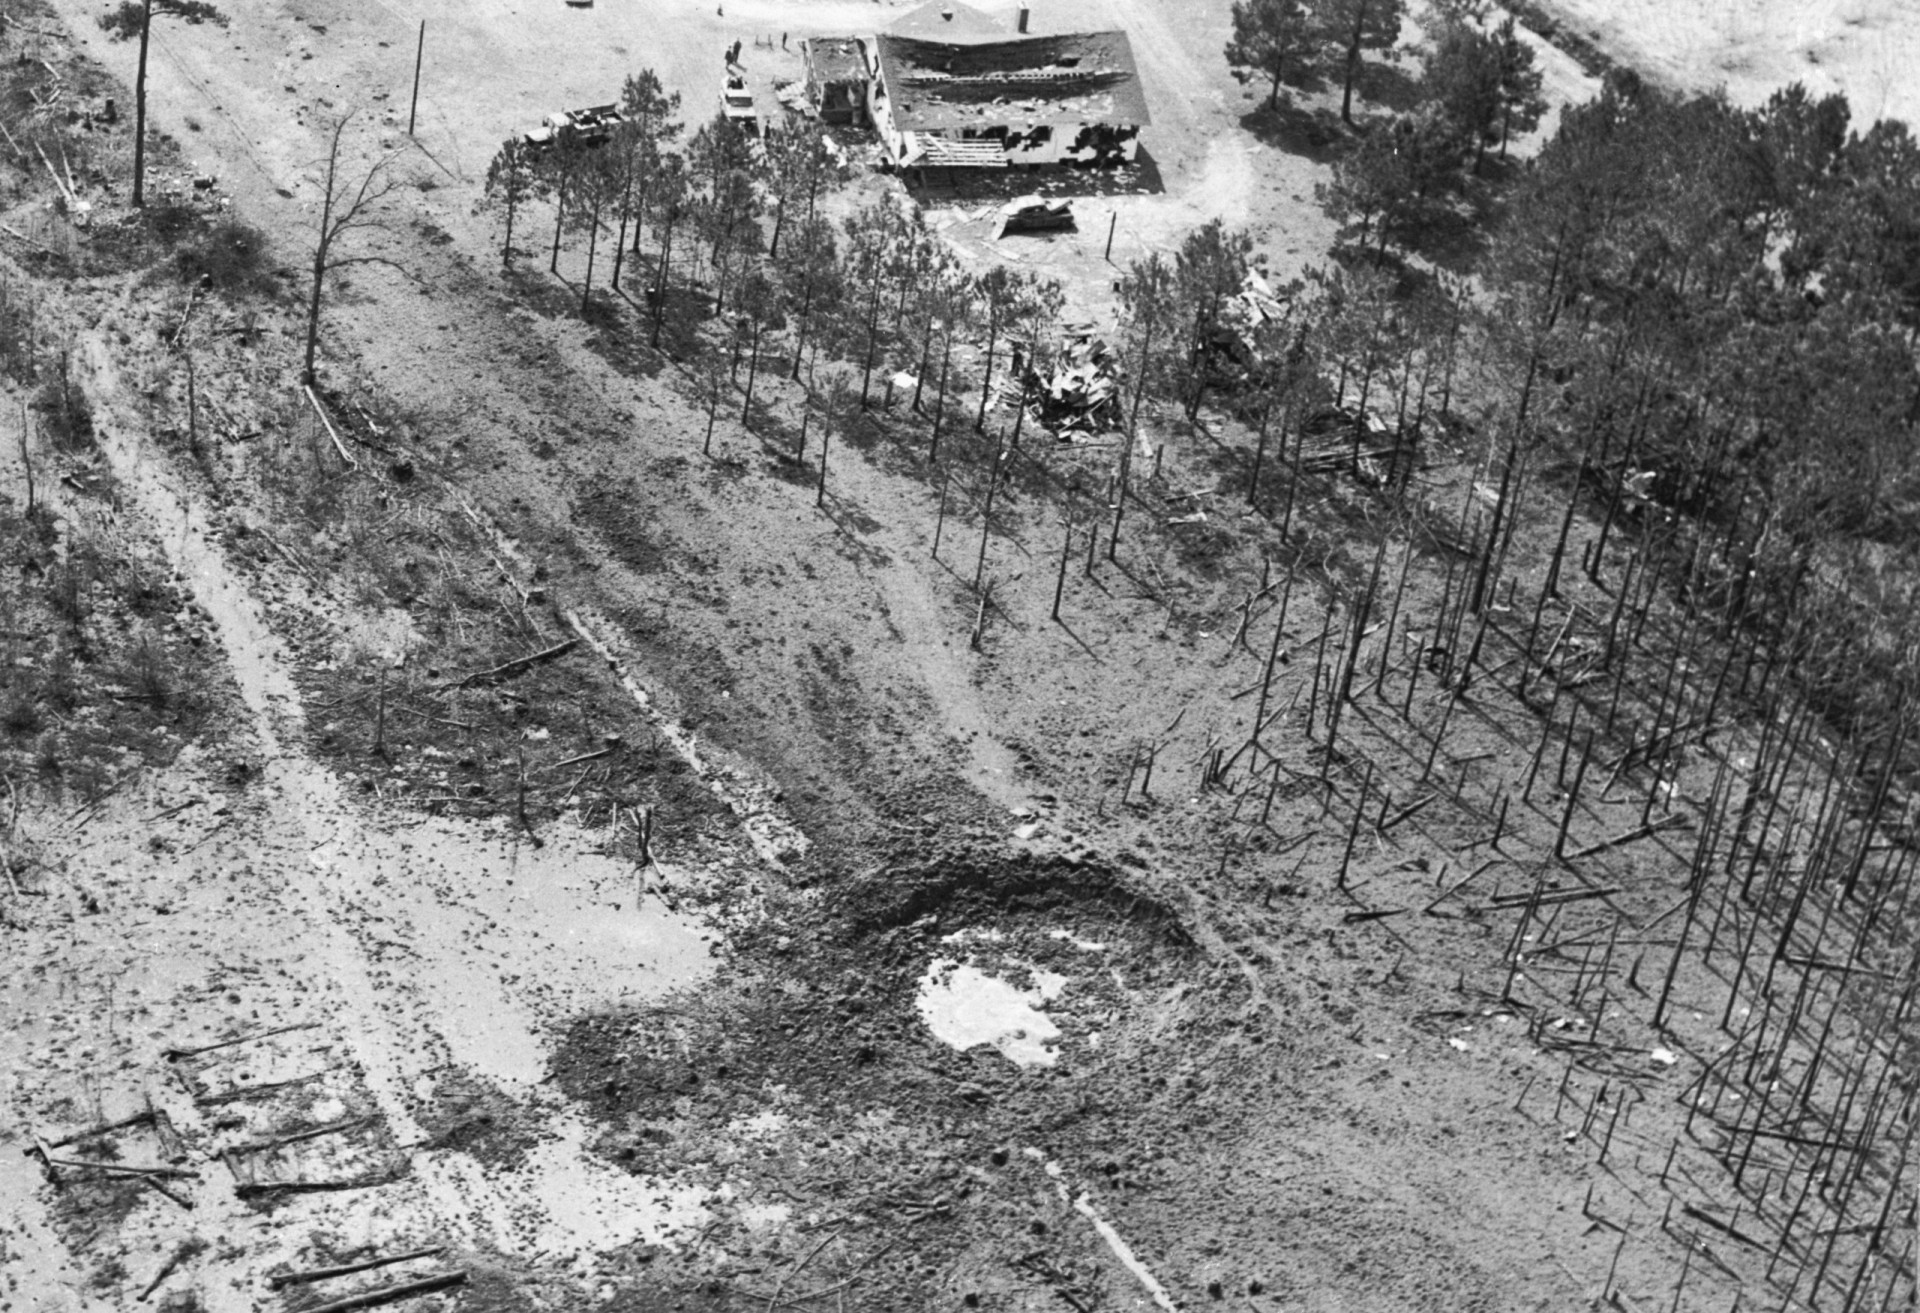 <p>On March 11, 1958, a US Air Force B-47 Stratojet with a nuclear bomb accidentally released it. The resulting explosion created a crater estimated to be 75 feet (23 m) wide and 25–35 feet (7.6–10.7 m) deep. It destroyed a local playhouse and leveled nearby trees. No one was killed.</p><p>You may also like:<a href="https://www.starsinsider.com/n/453899?utm_source=msn.com&utm_medium=display&utm_campaign=referral_description&utm_content=686881en-us"> Movies with surprising alternate endings</a></p>